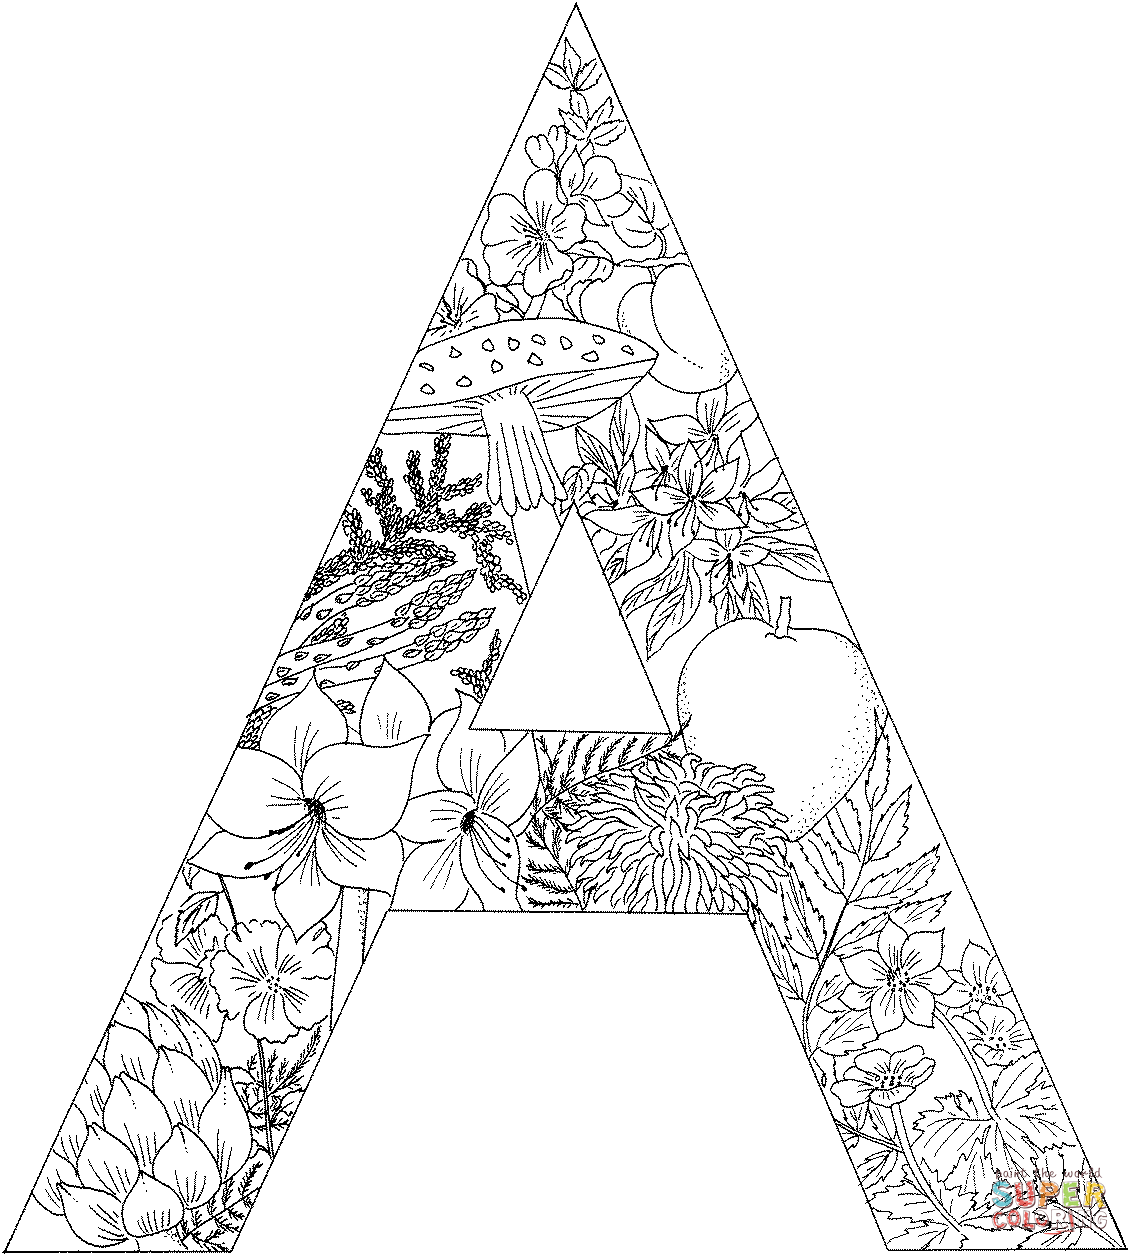 32+ Alphabet Coloring Pages For Adults - TamsinAsfar